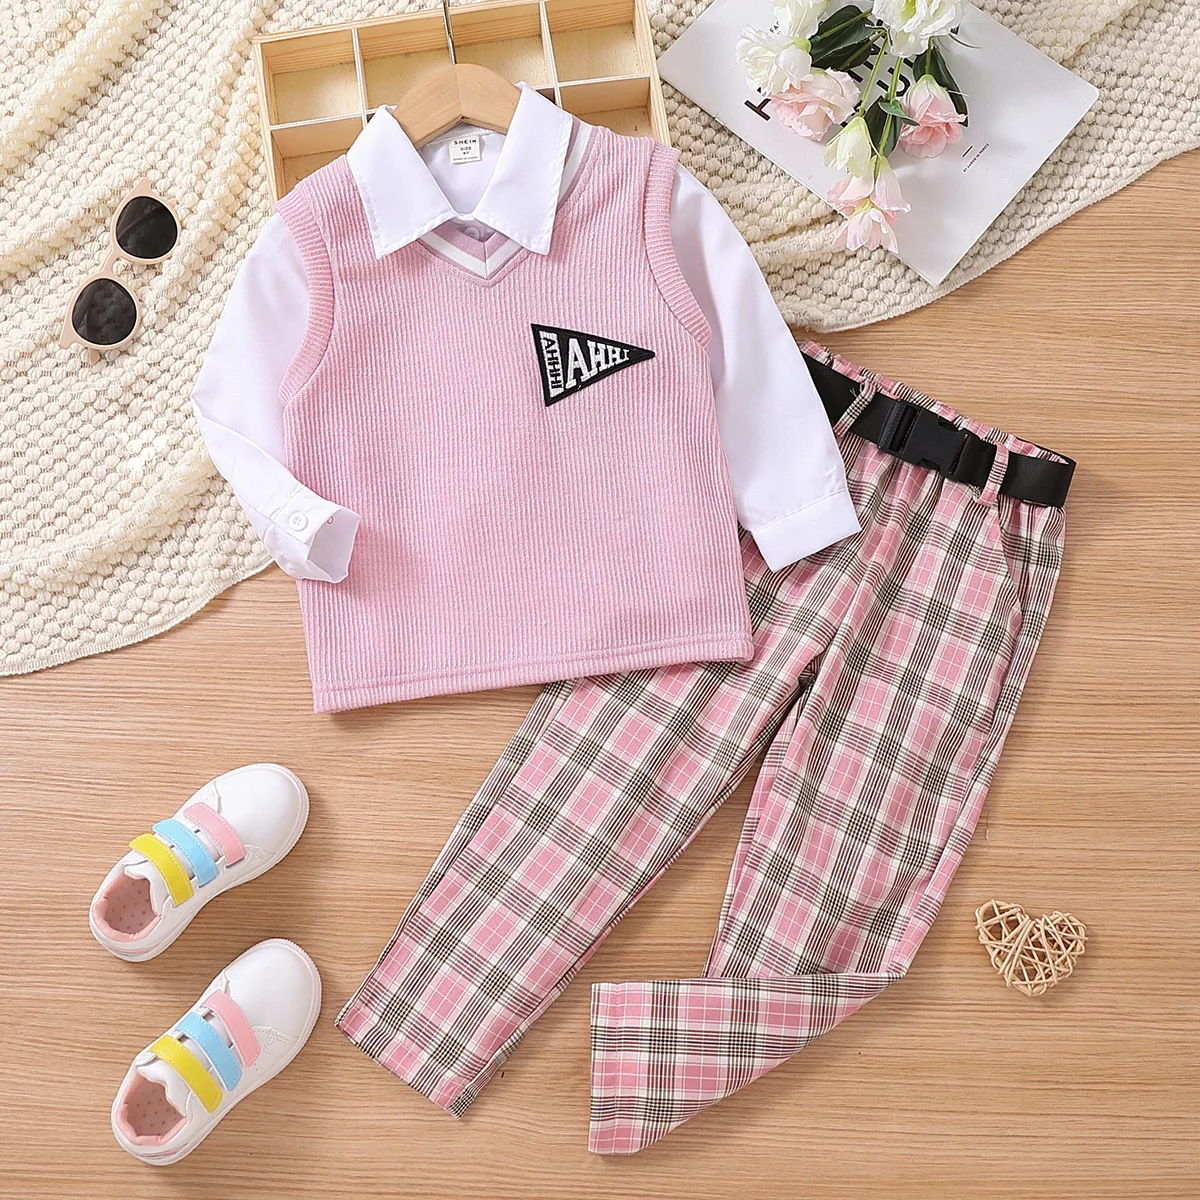 Toddler kids clothing outfits little girls preppy style shirt match sweater vest+pink plaid pants kids boutique outfits